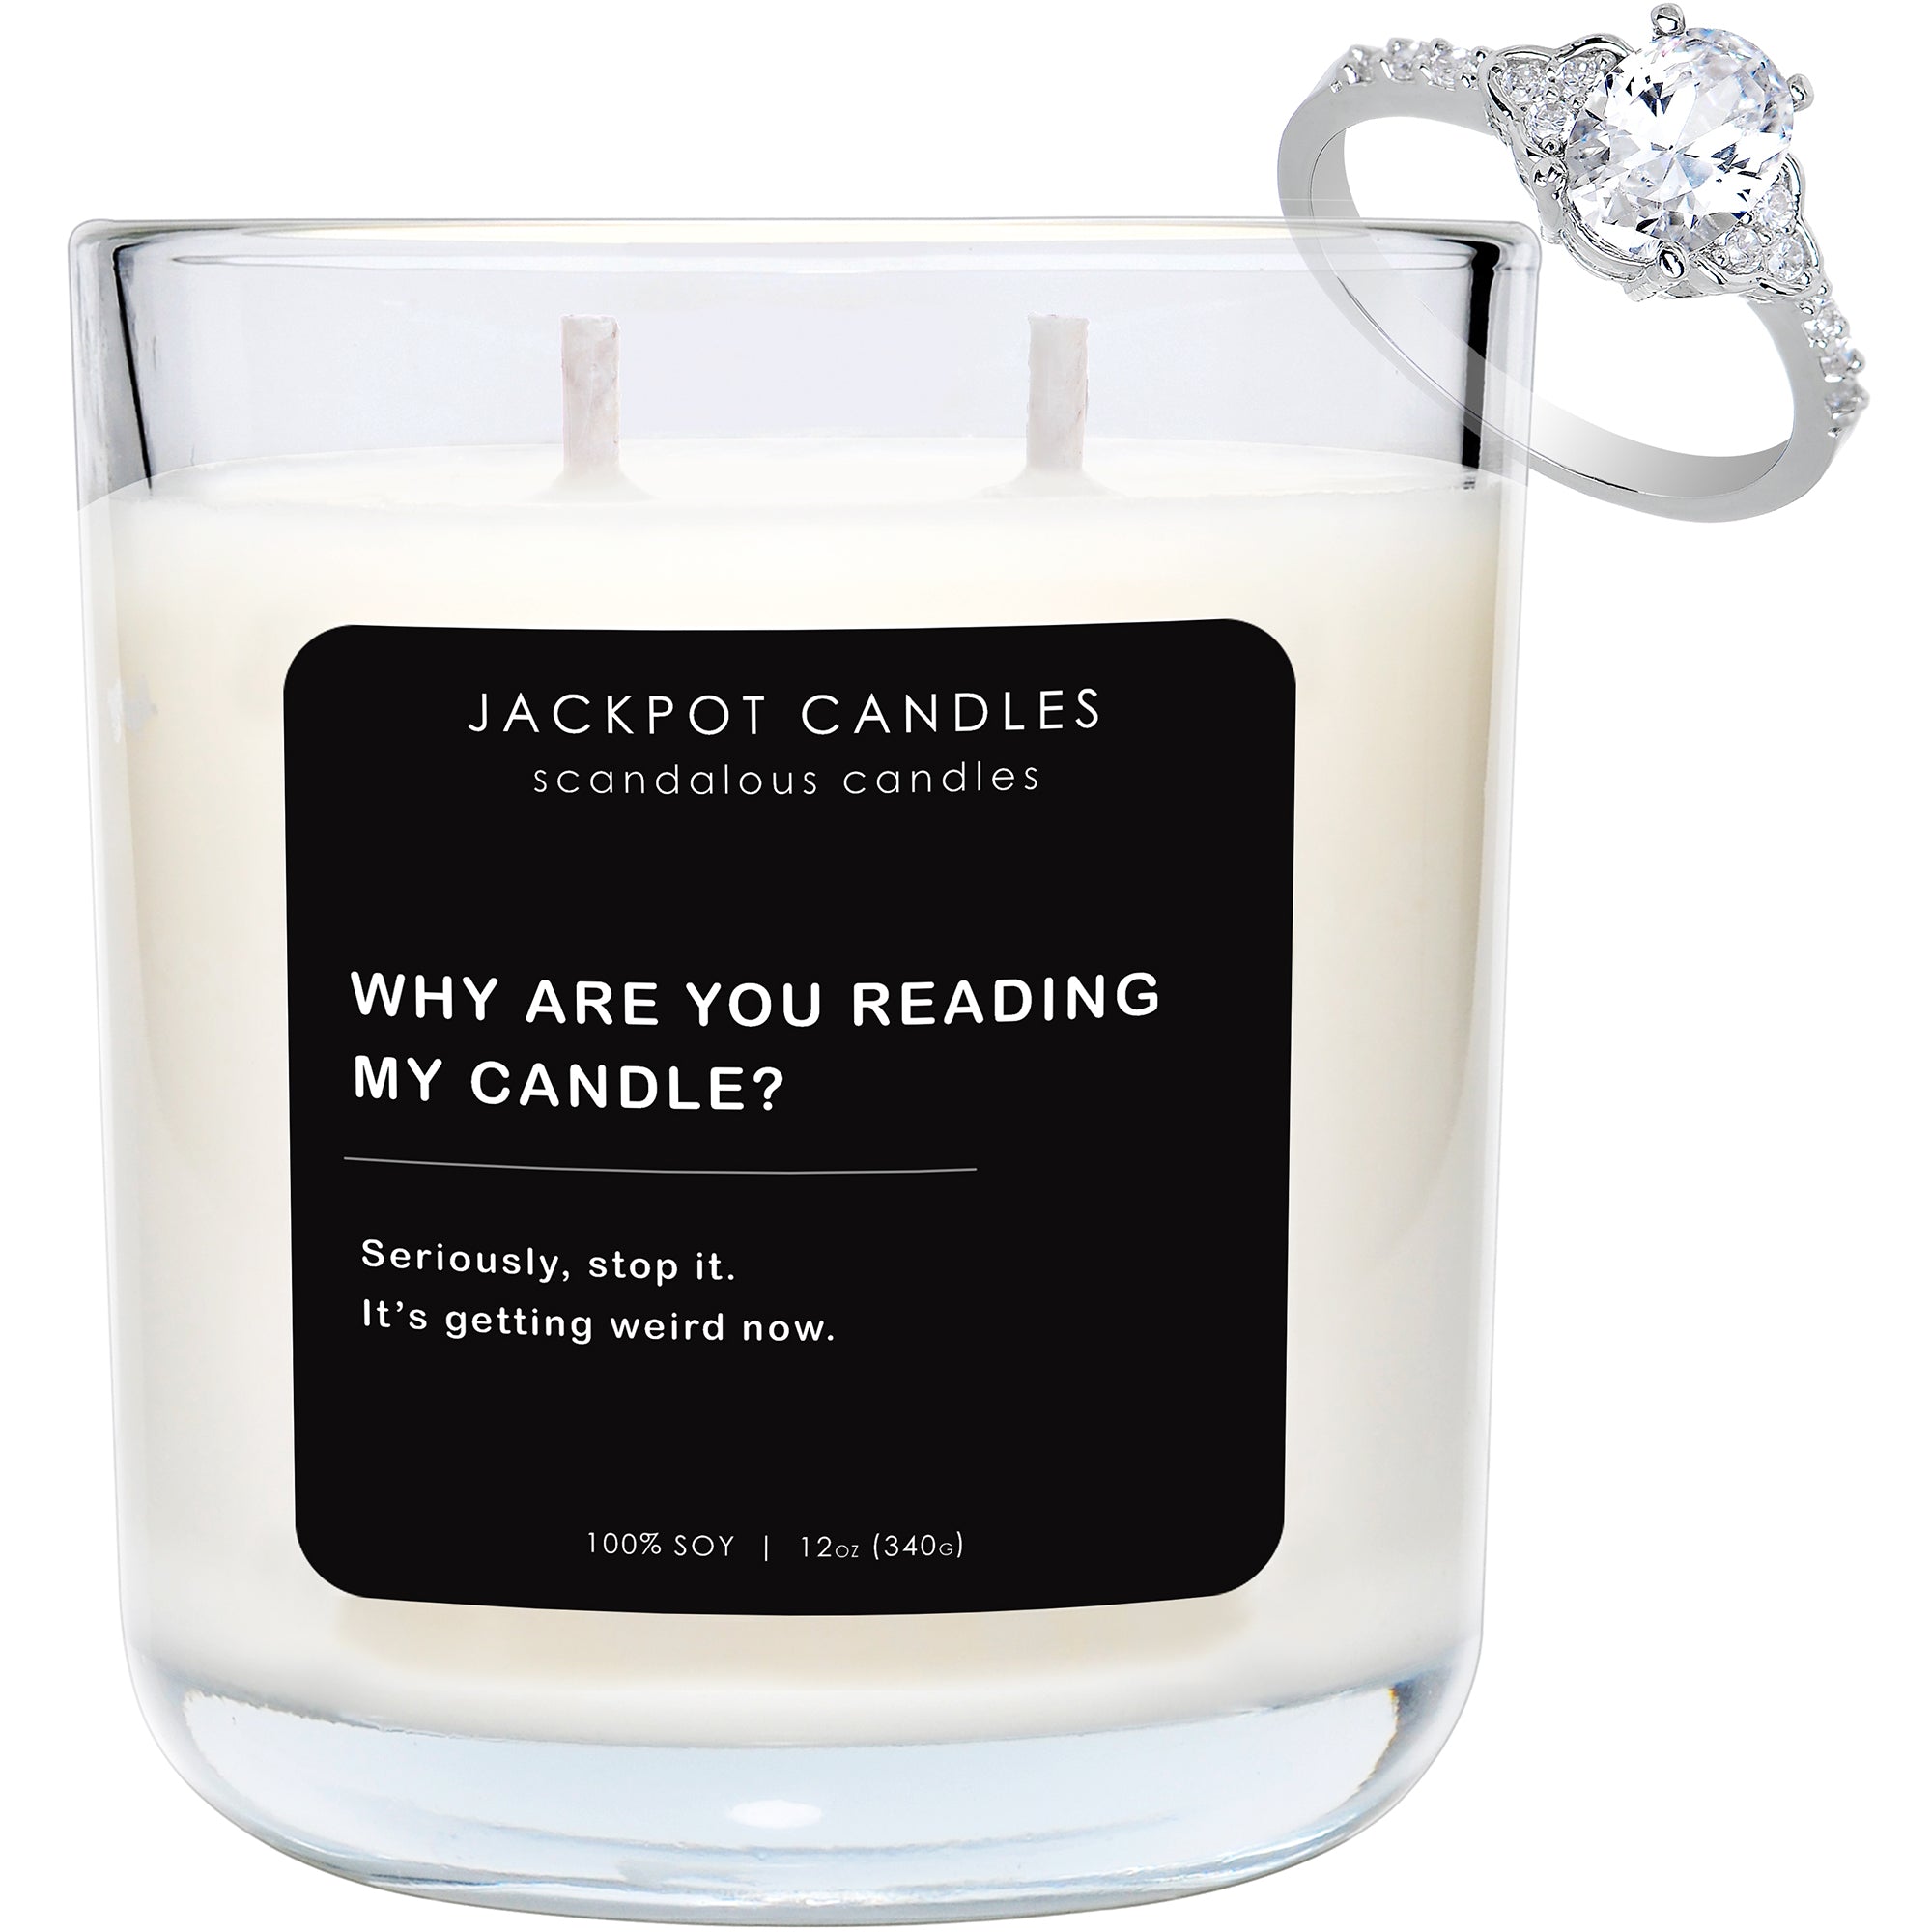 Why are You Reading My Candle Scandalous Candle